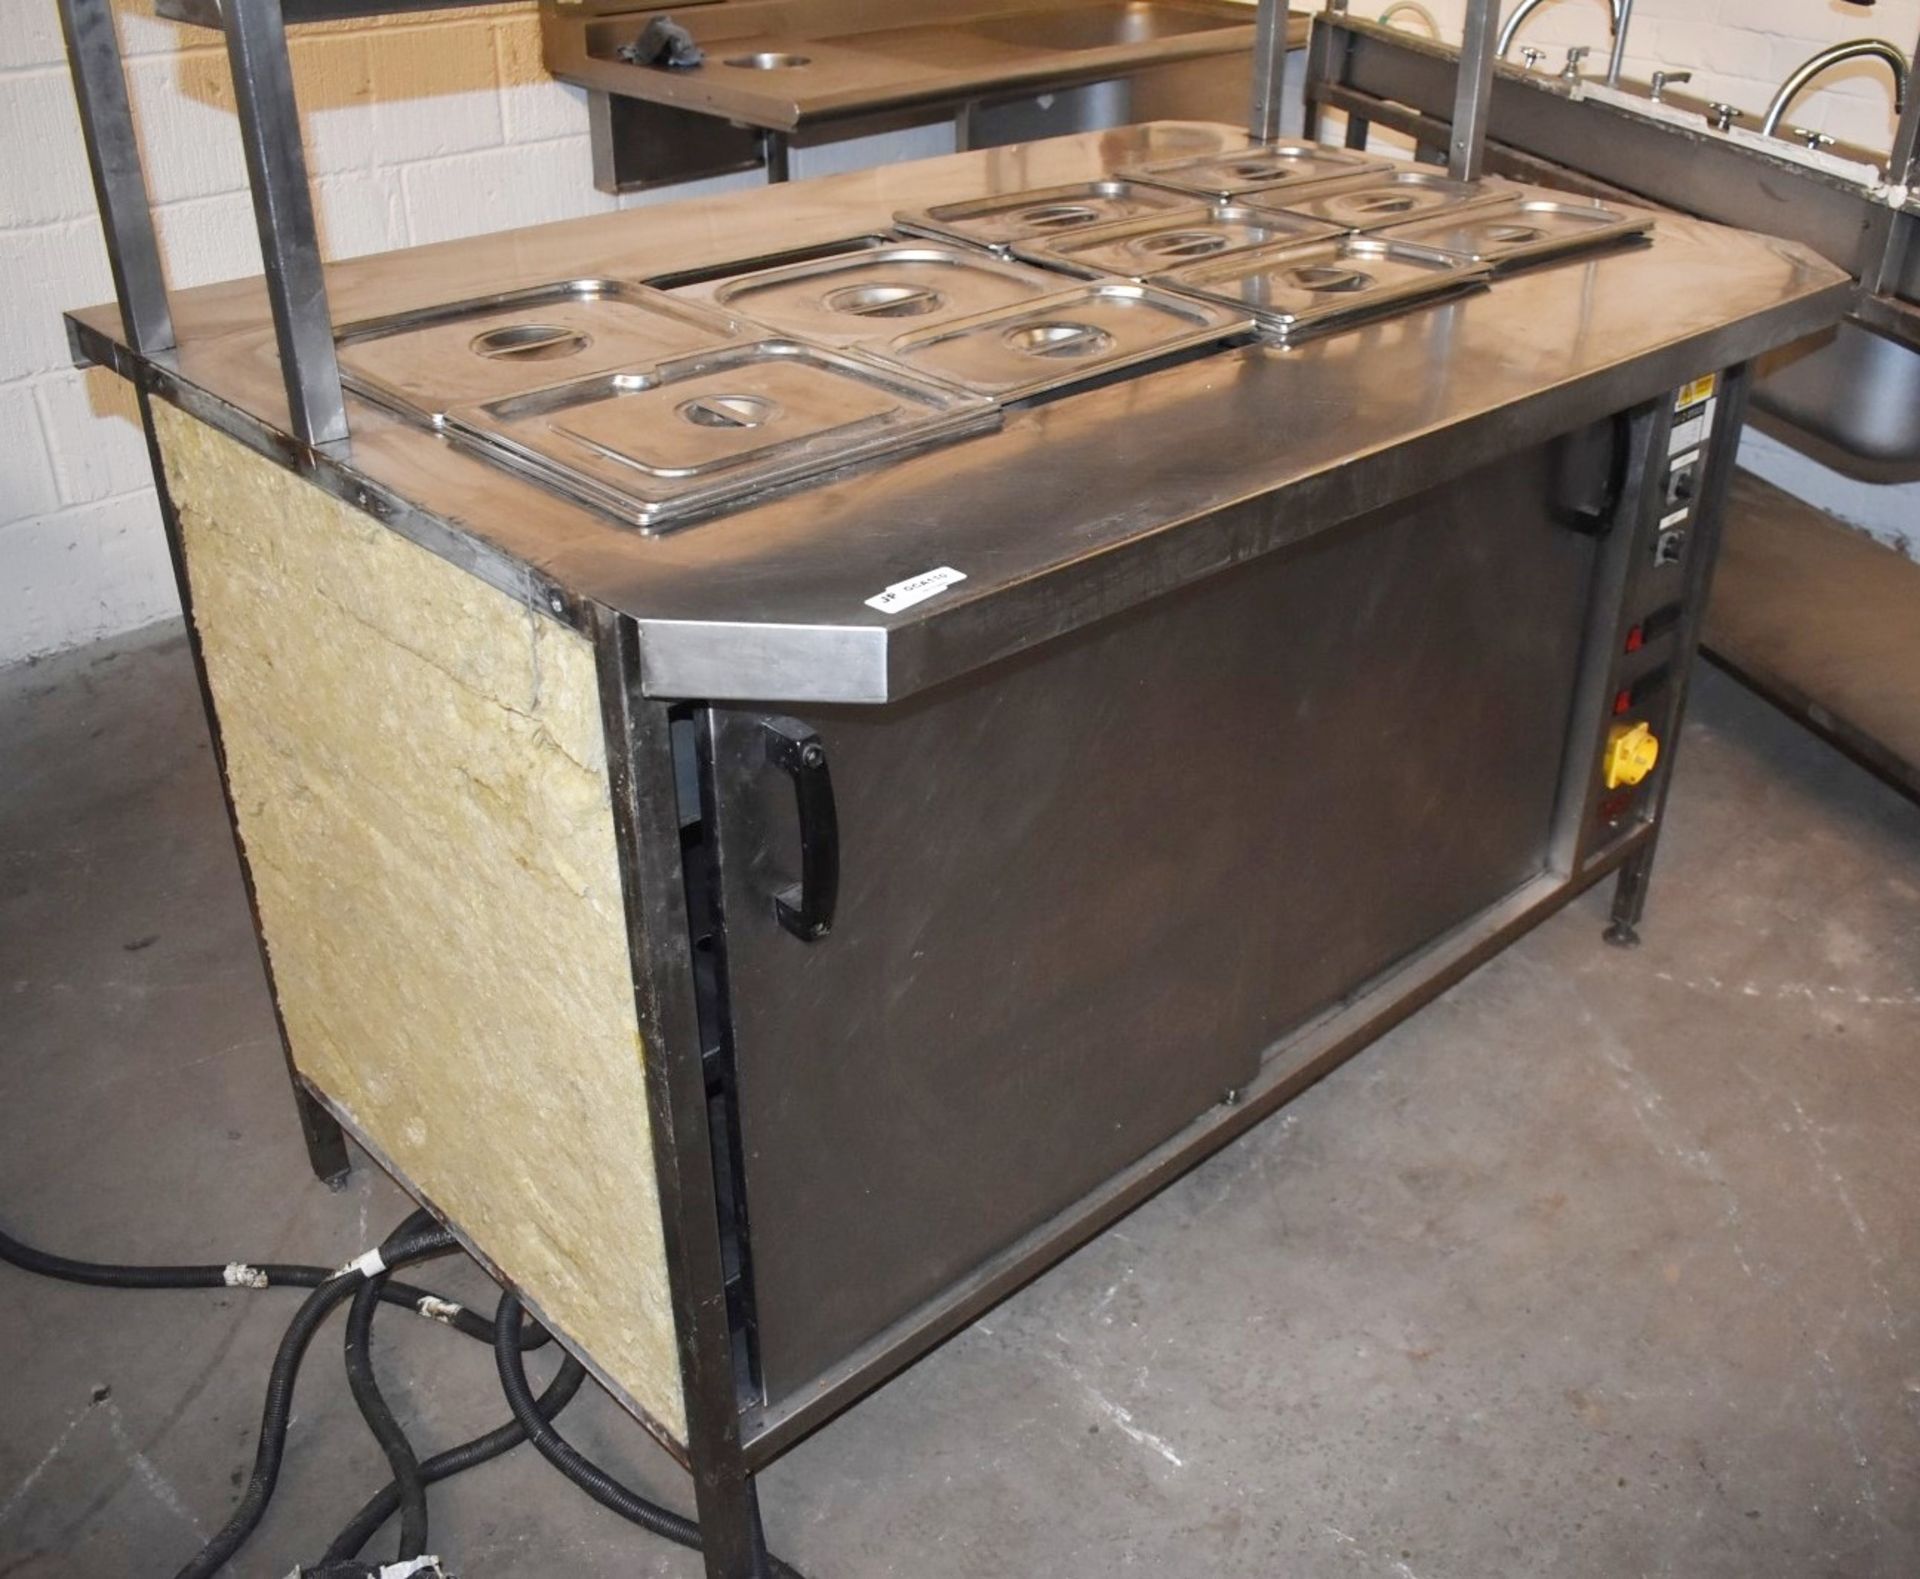 1 x Baine Marie Food Warming Island With Passthrough Plate Warmers, Hot Cupboard and 10 Gastro - Image 12 of 22